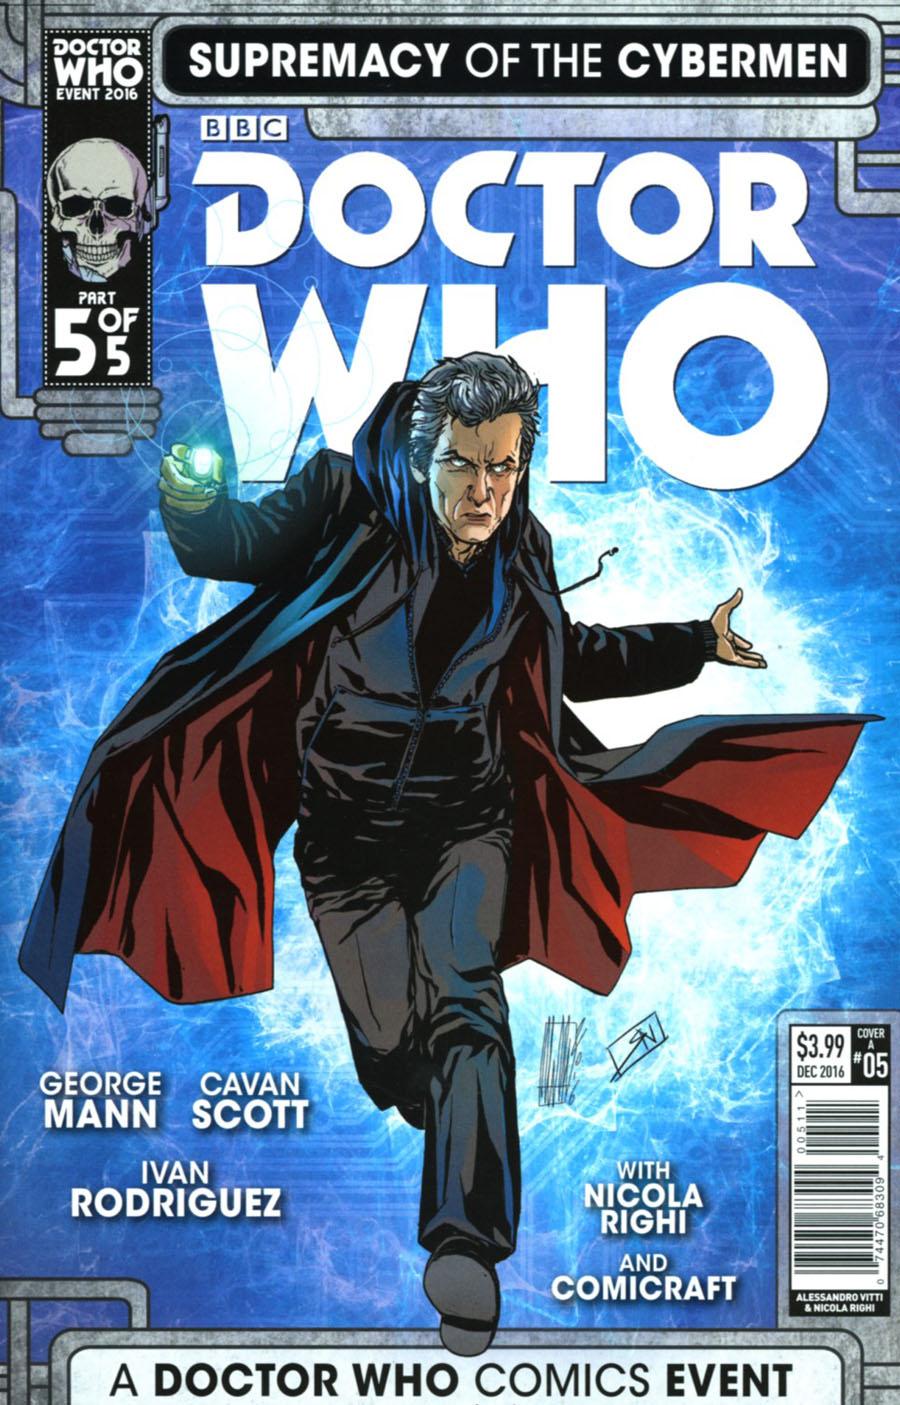 Doctor Who Event 2016 Supremacy Of The Cybermen Vol. 1 #5